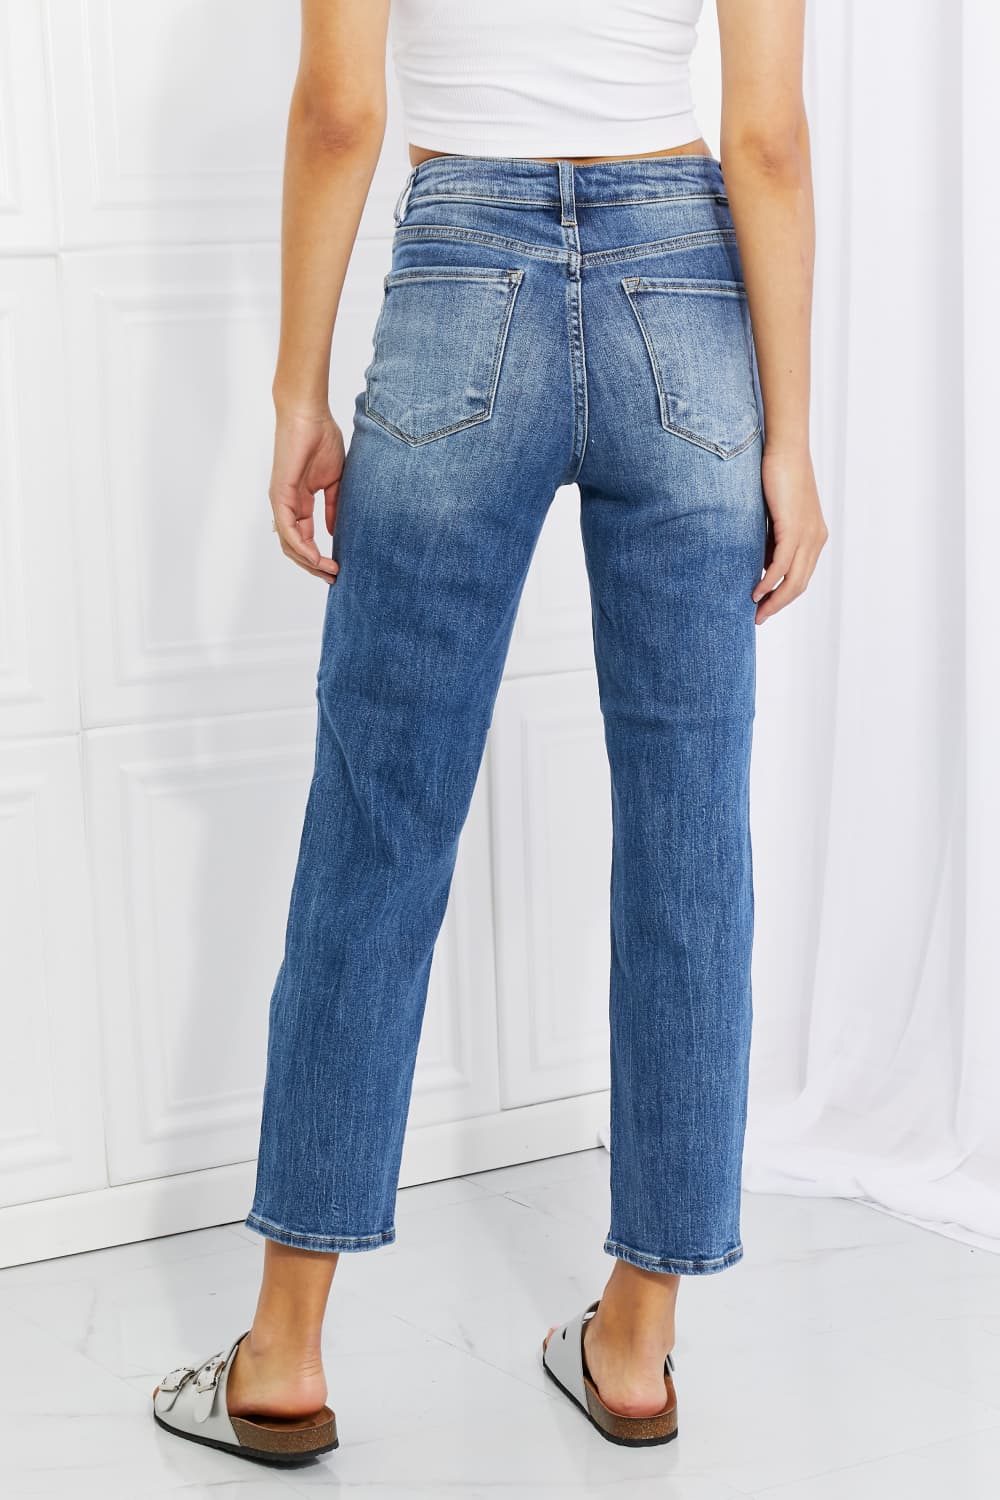 RISEN Emelia High Rise Relaxed Jeans Pants RYSE Clothing Co.   